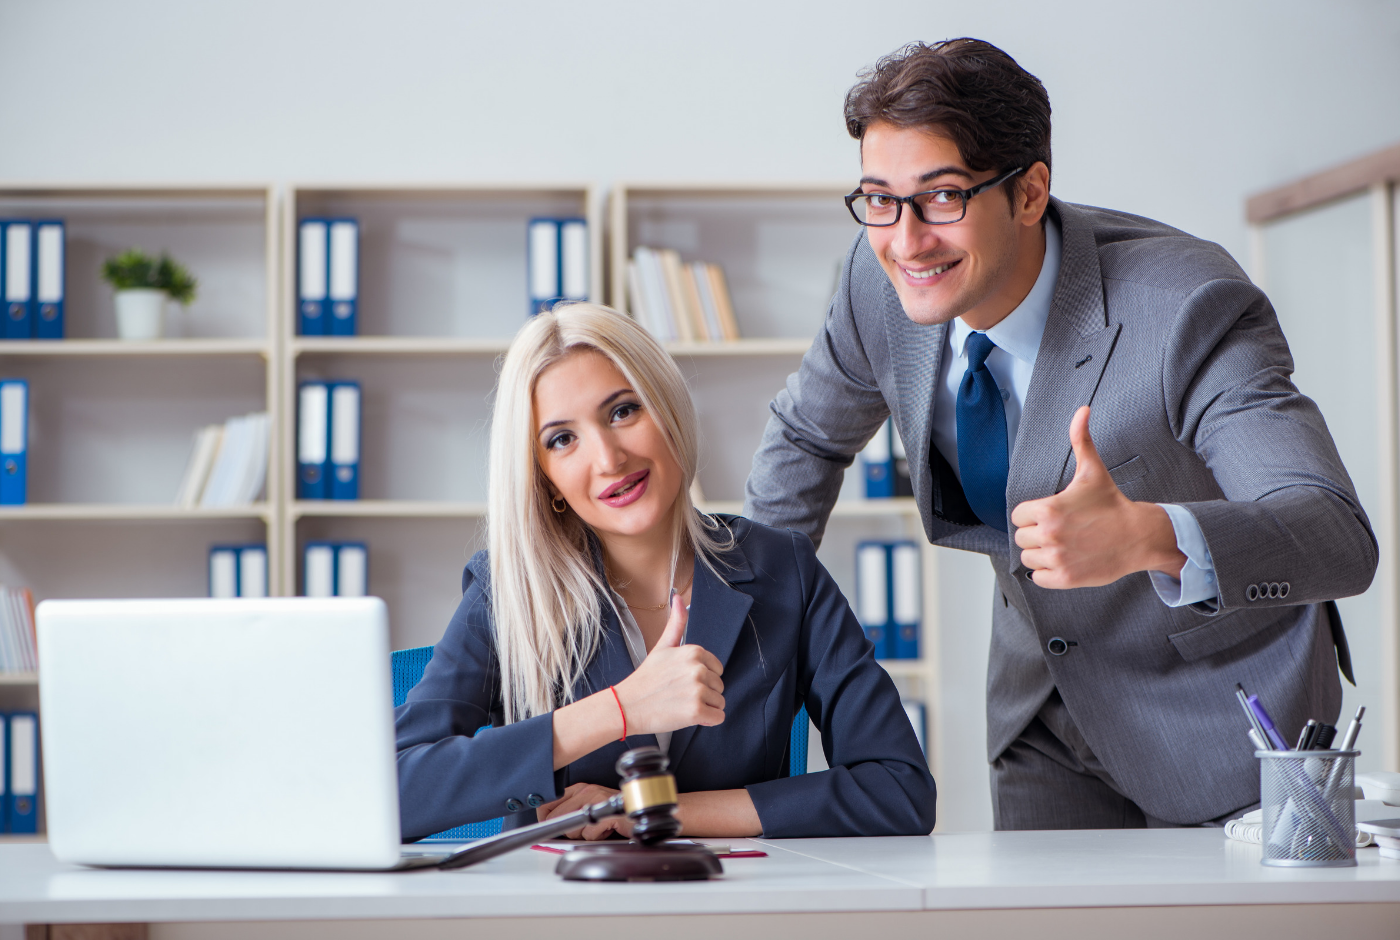 Professional man and woman in business suits with fake smiles at desk with laptop and gavel on it.